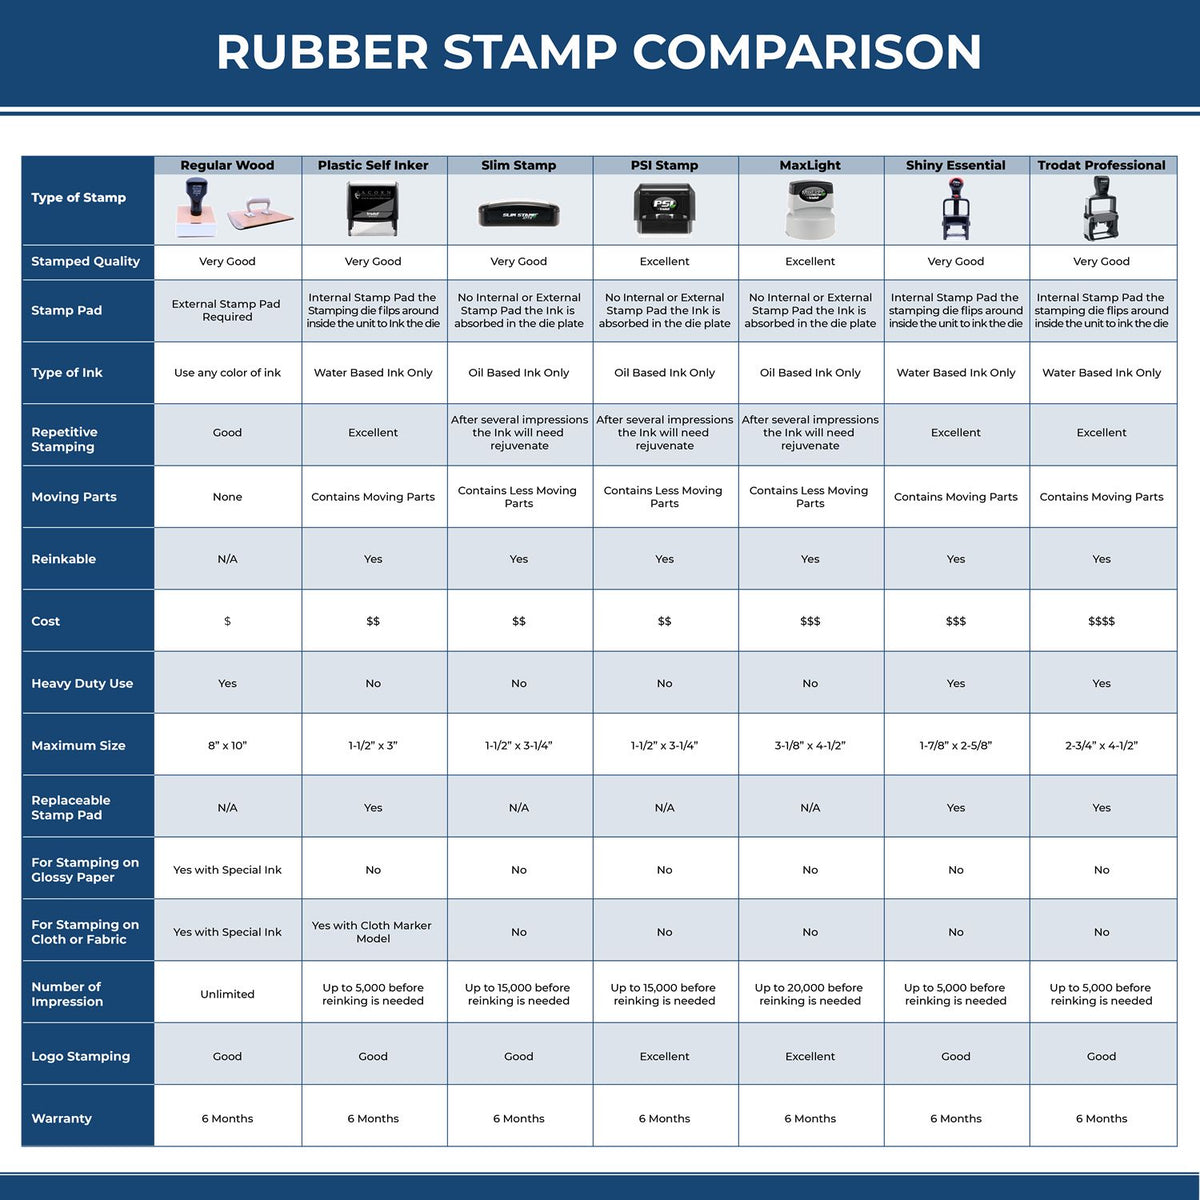 A comparison chart for the different types of mount models available for the Self-Inking Ohio Landscape Architect Stamp.